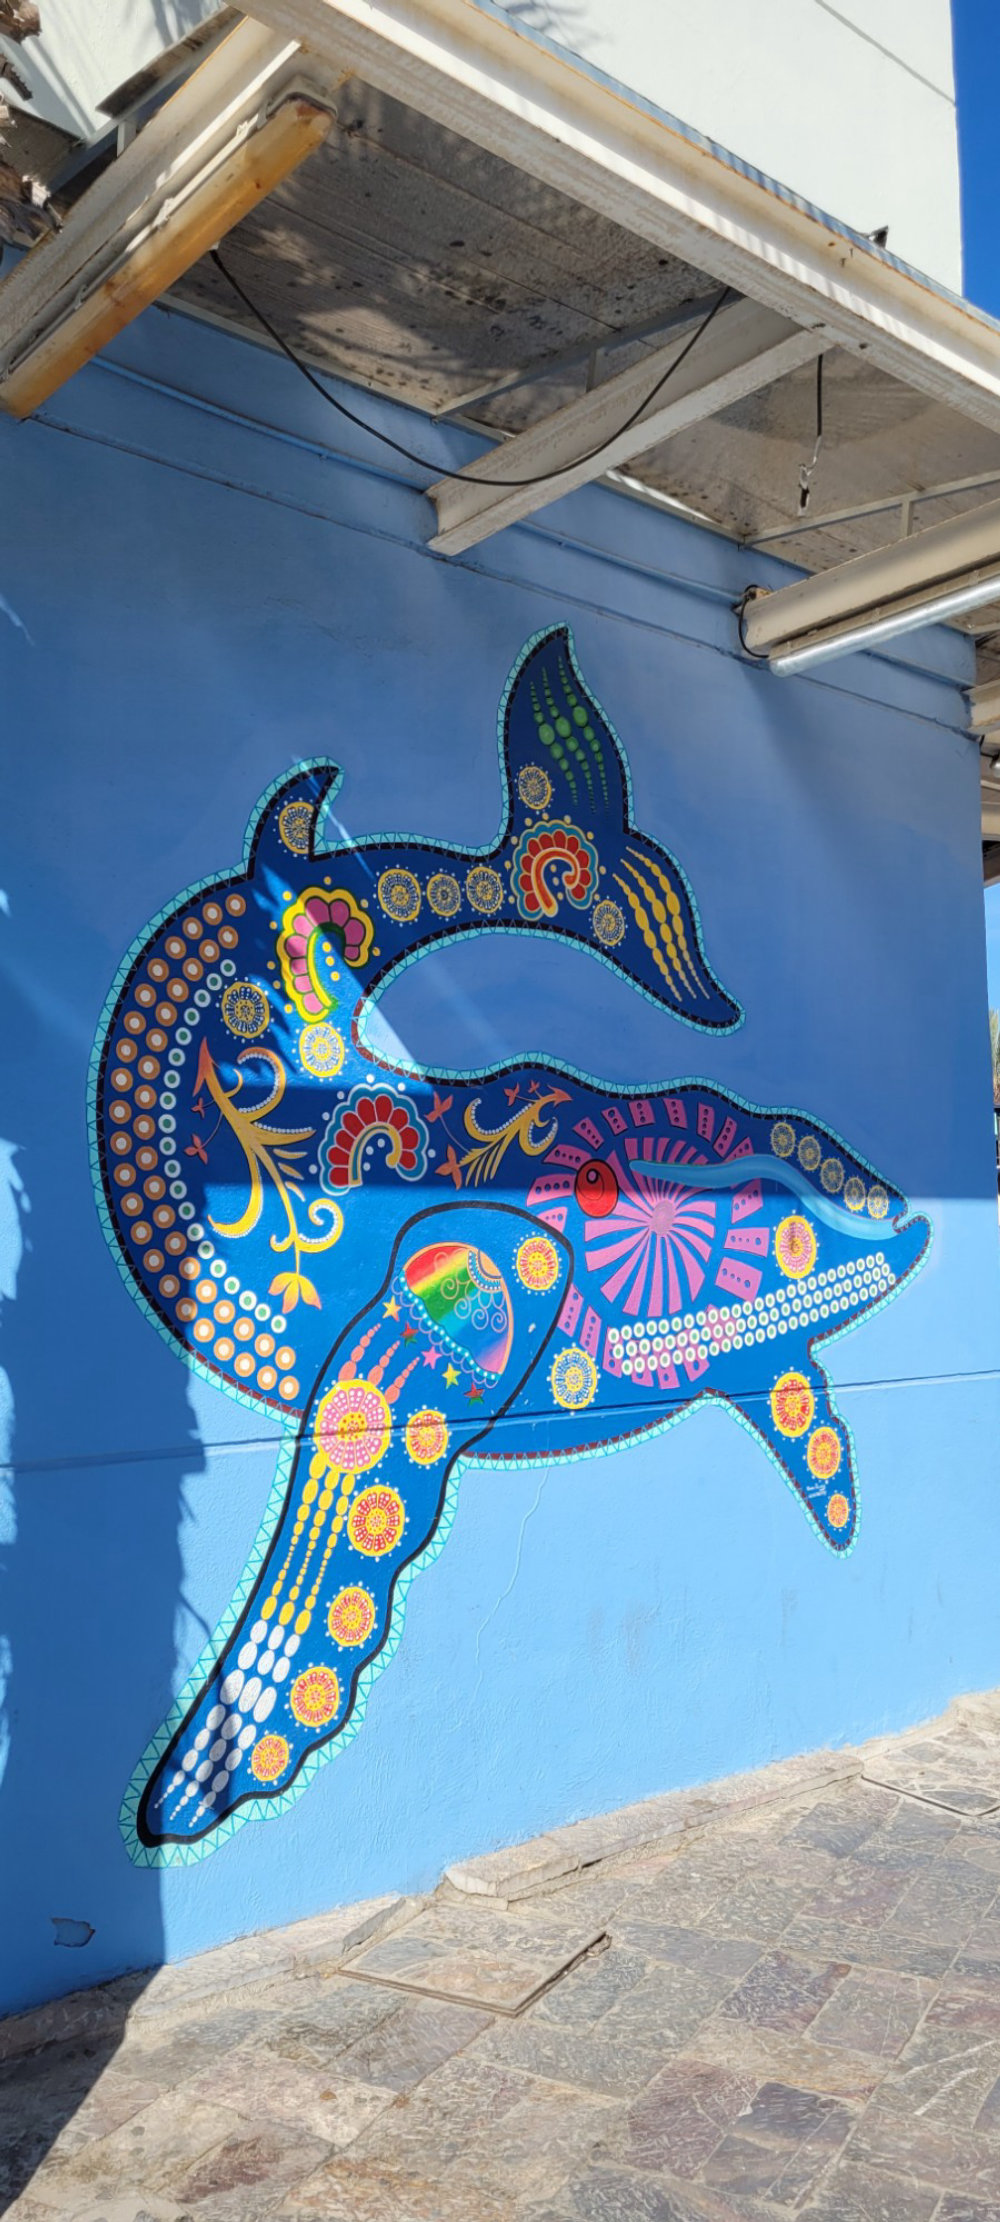 mural in Cabo San Lucas by artist unknown.